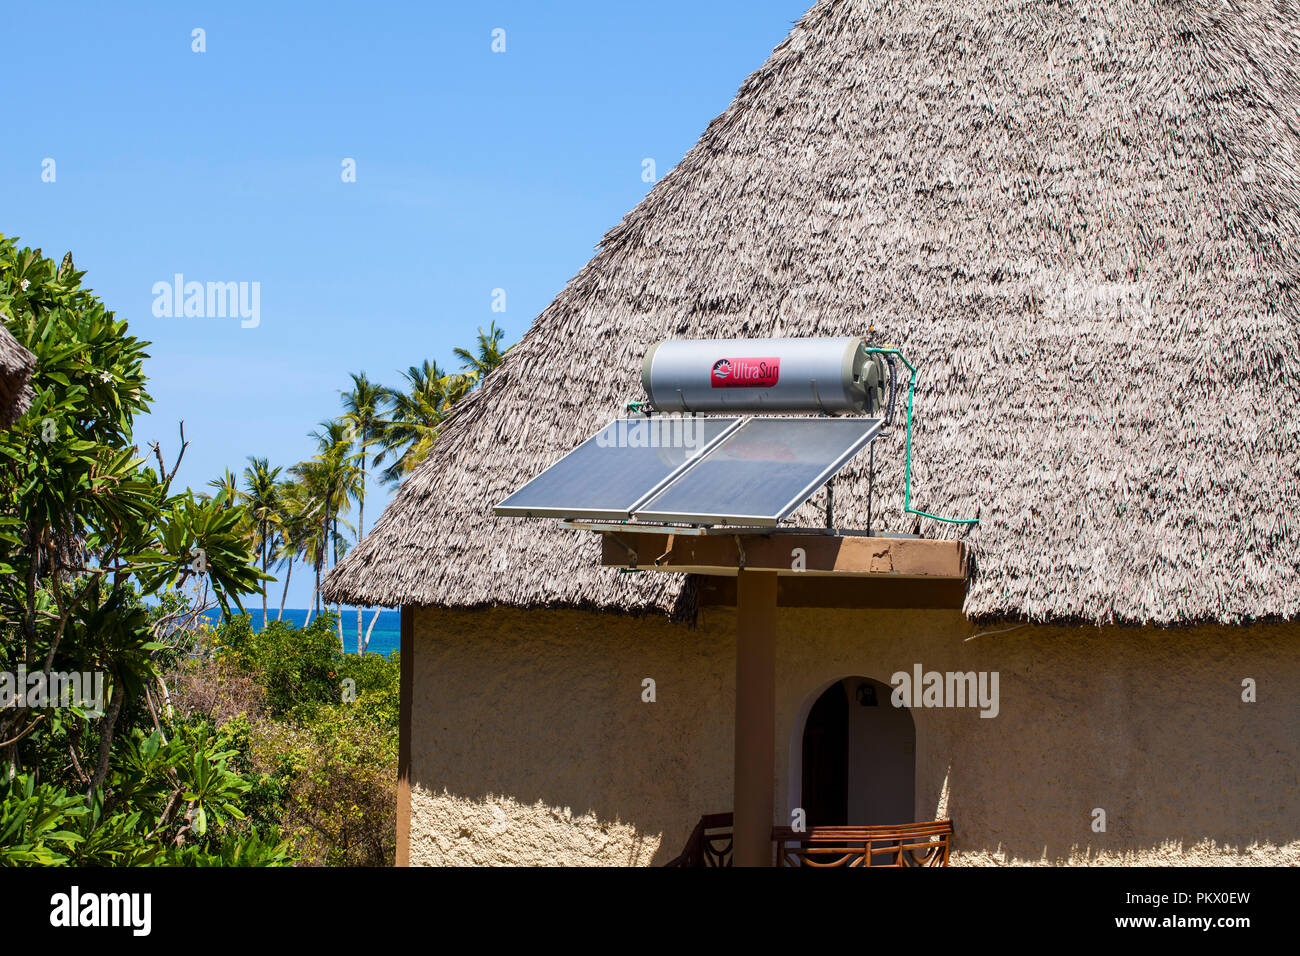 GALU - KINONDO BEACH, KENYA - FEBRUARY 26, 2018: Systems for heating water from sunlight ( sun collectors) on roofs of hotel Neptune Paradise Beach Re Stock Photo